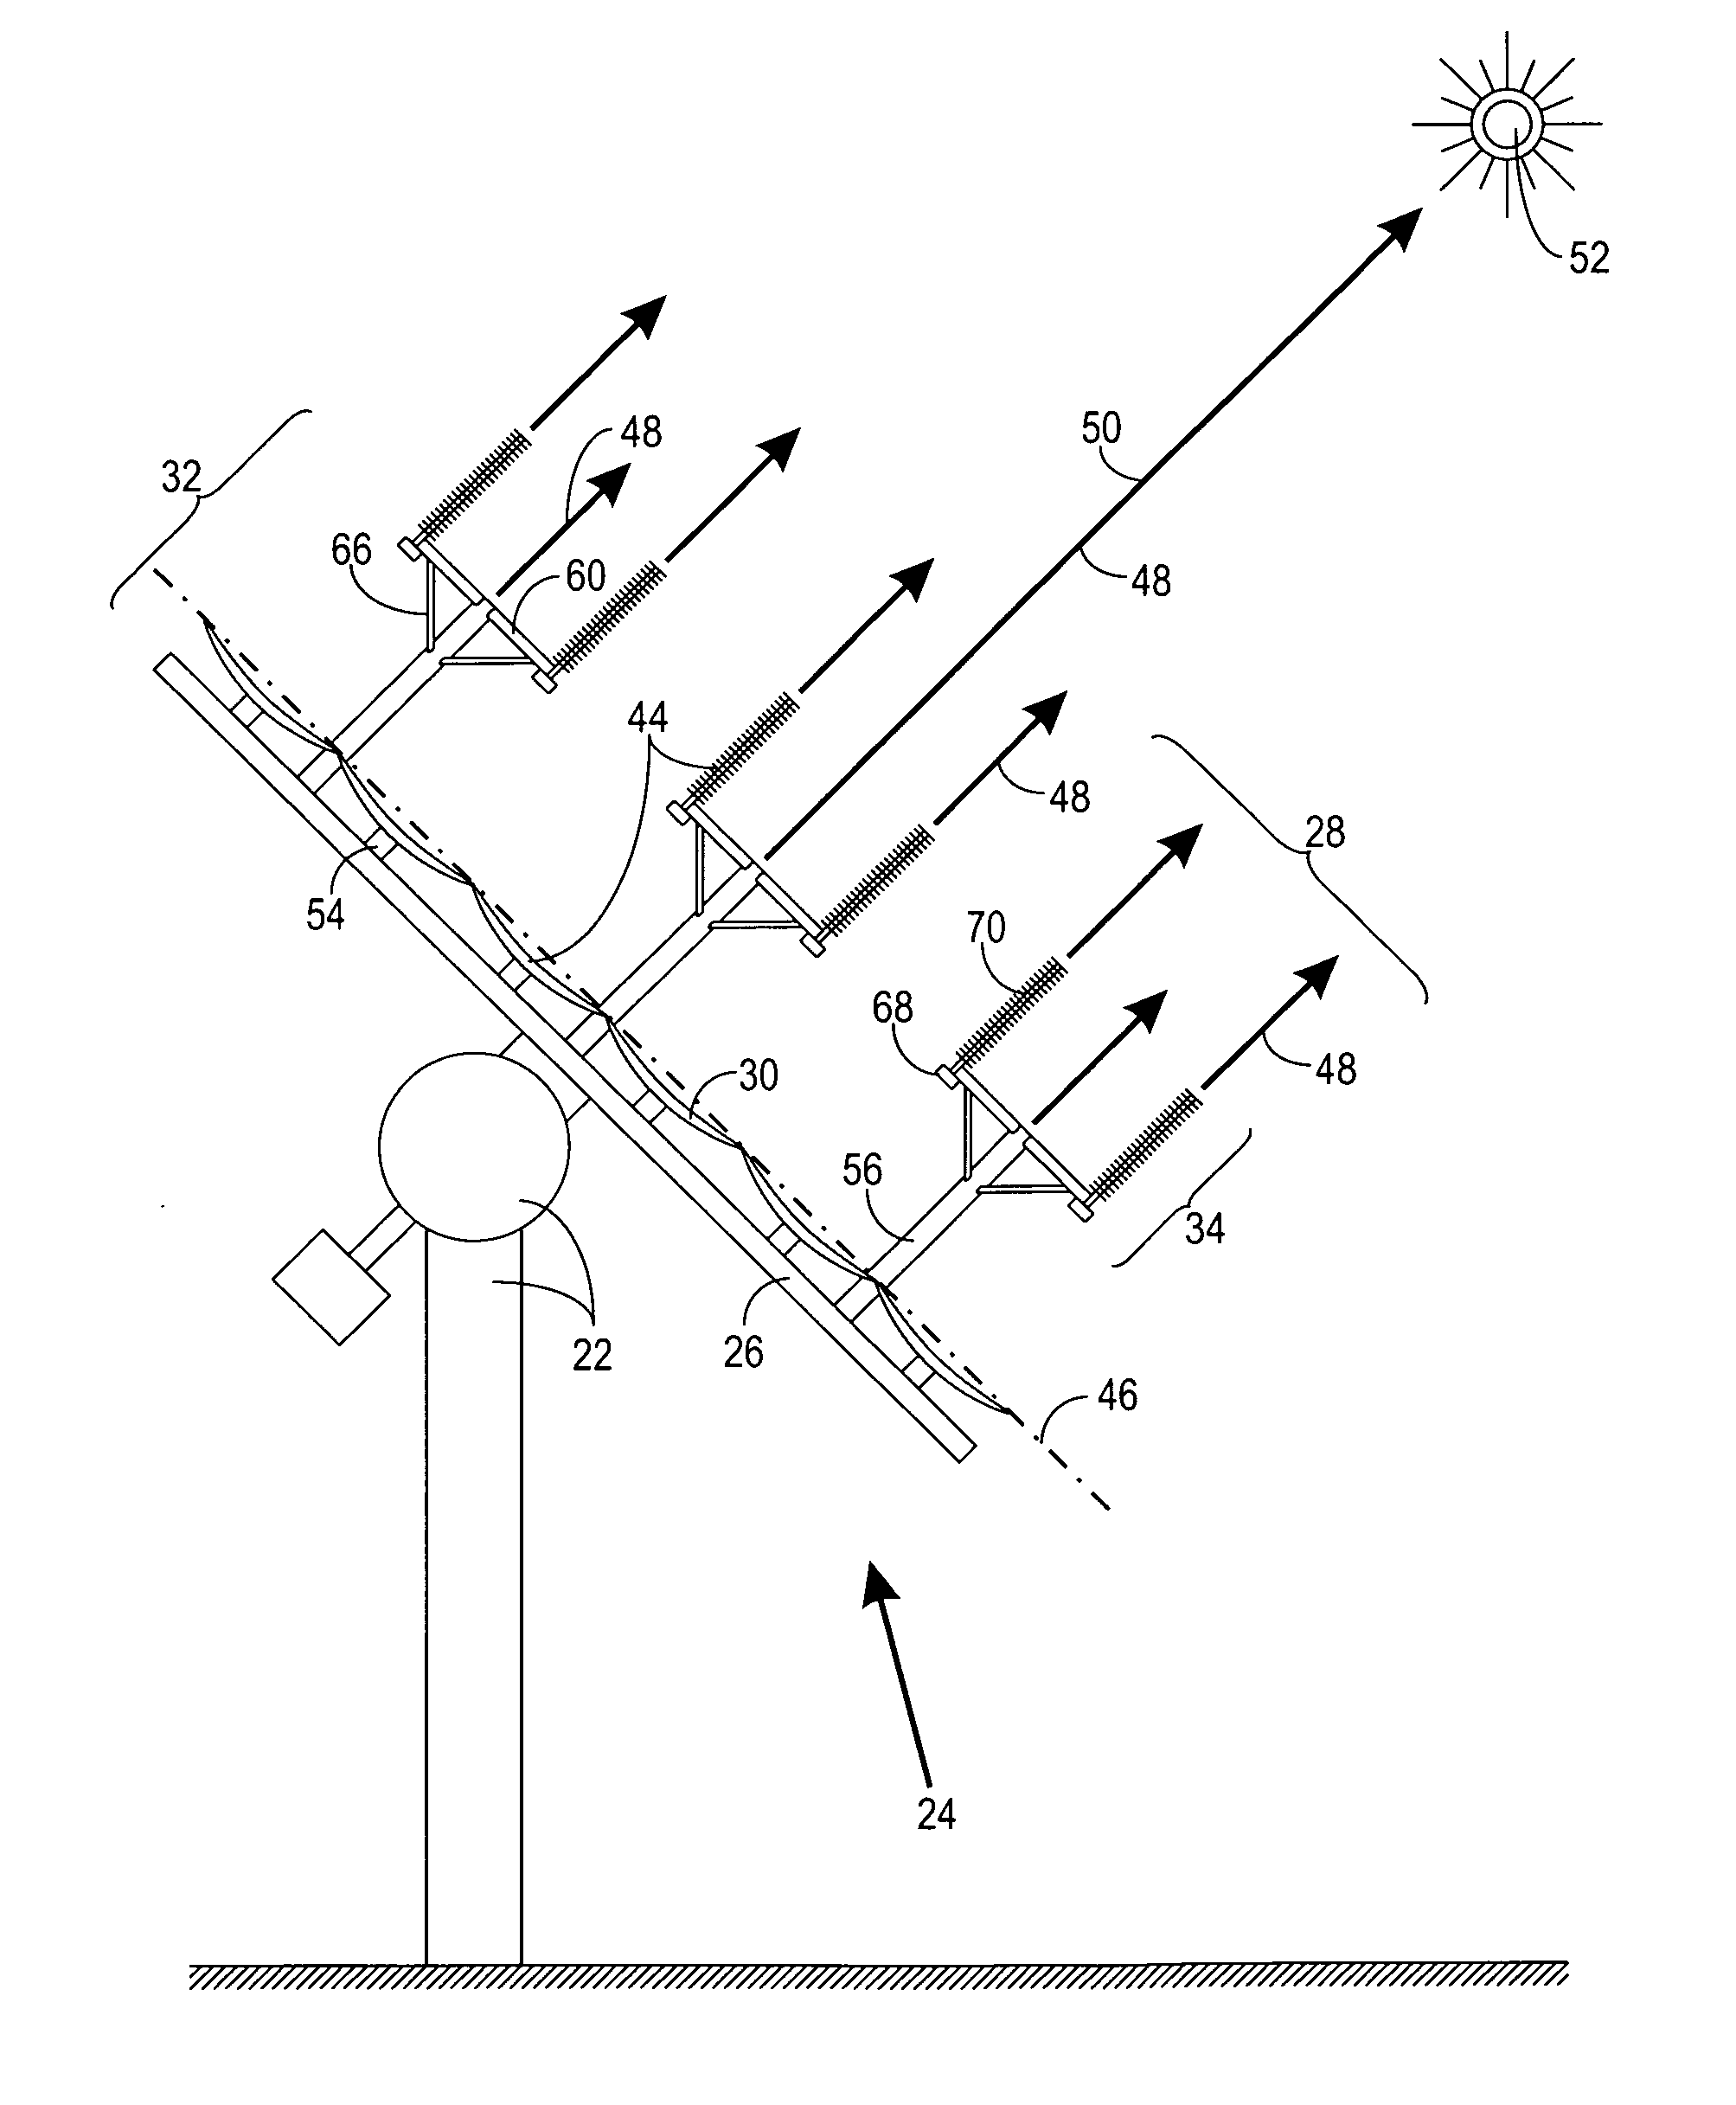 Clustered solar-energy conversion array and method therefor